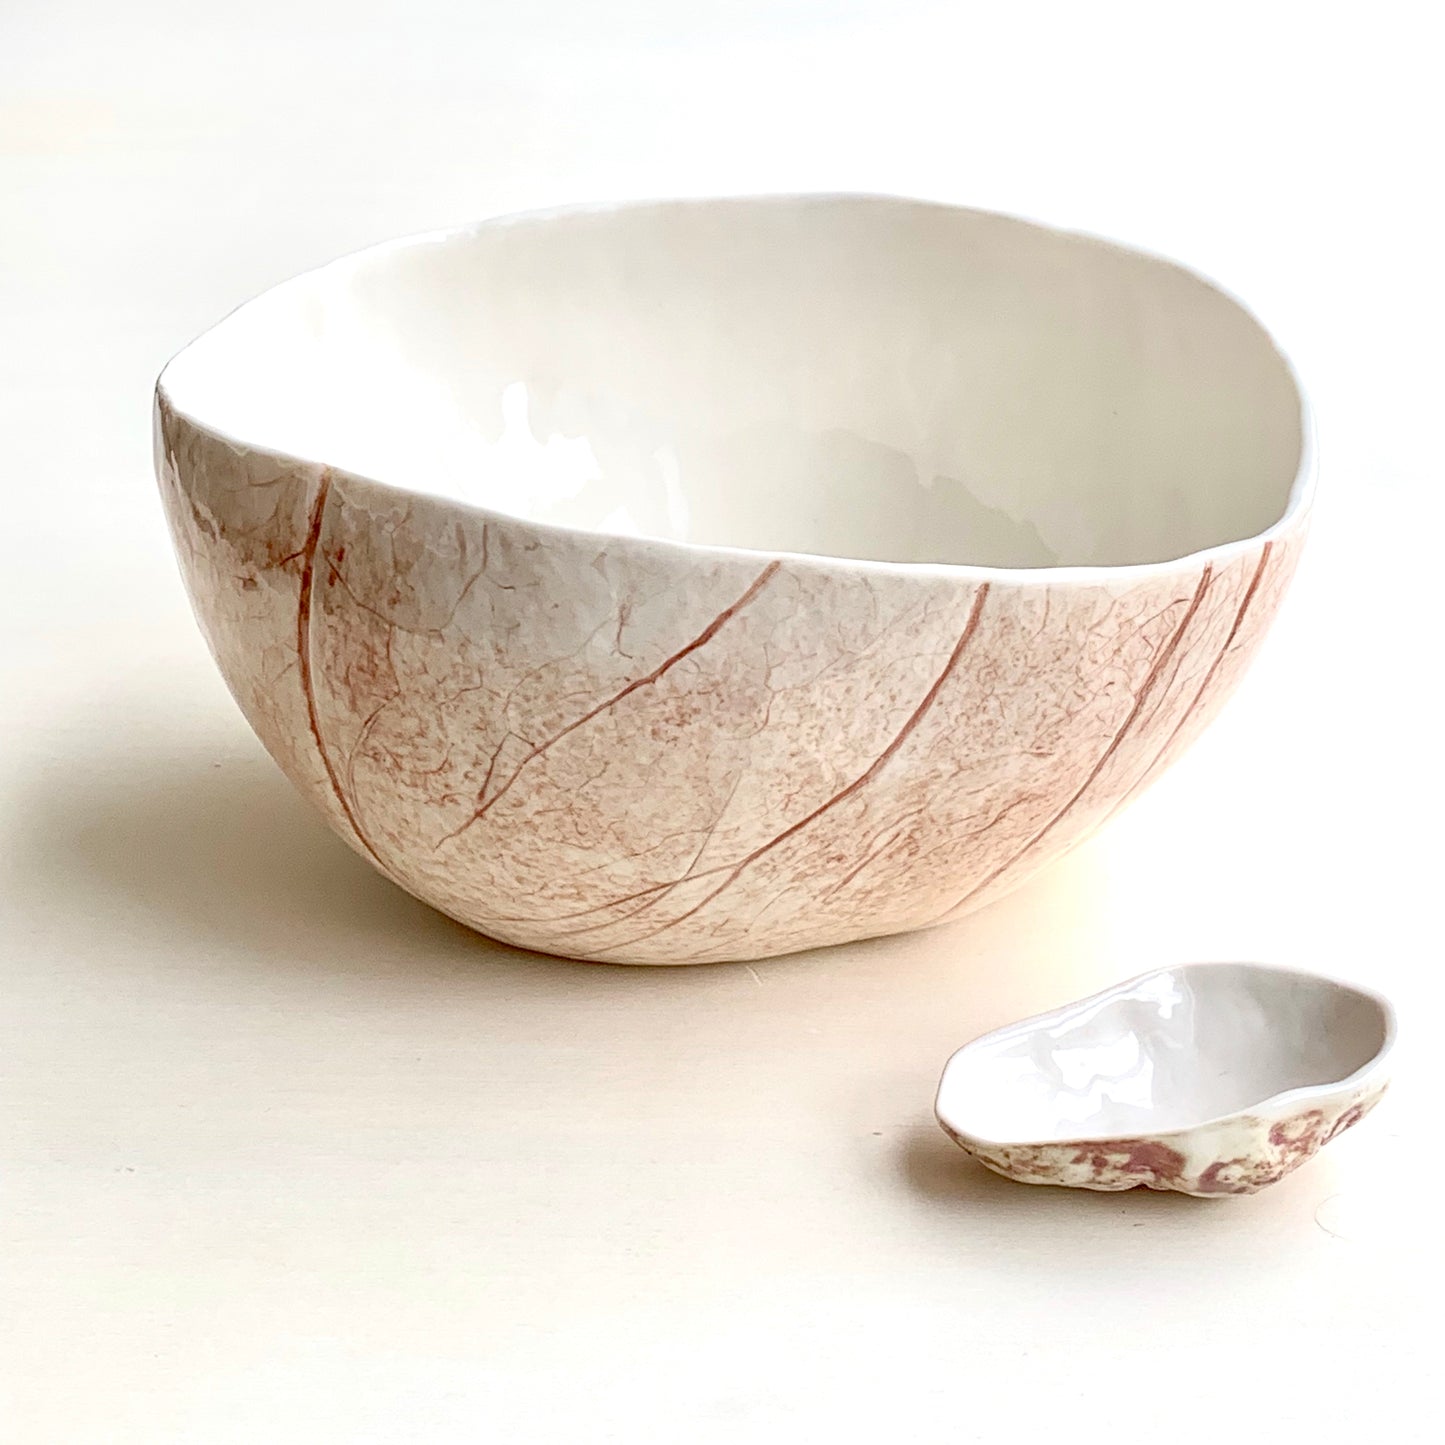 Unique handmade white porcelain ceramic bowl from the Amazon collection. This extra large bowl made of porcelain enriches your table setting with an elegant organic feel or will surprise someone as a personal ceramic gift. A one of a kind signature piece of tableware with a unique design and earth pigment